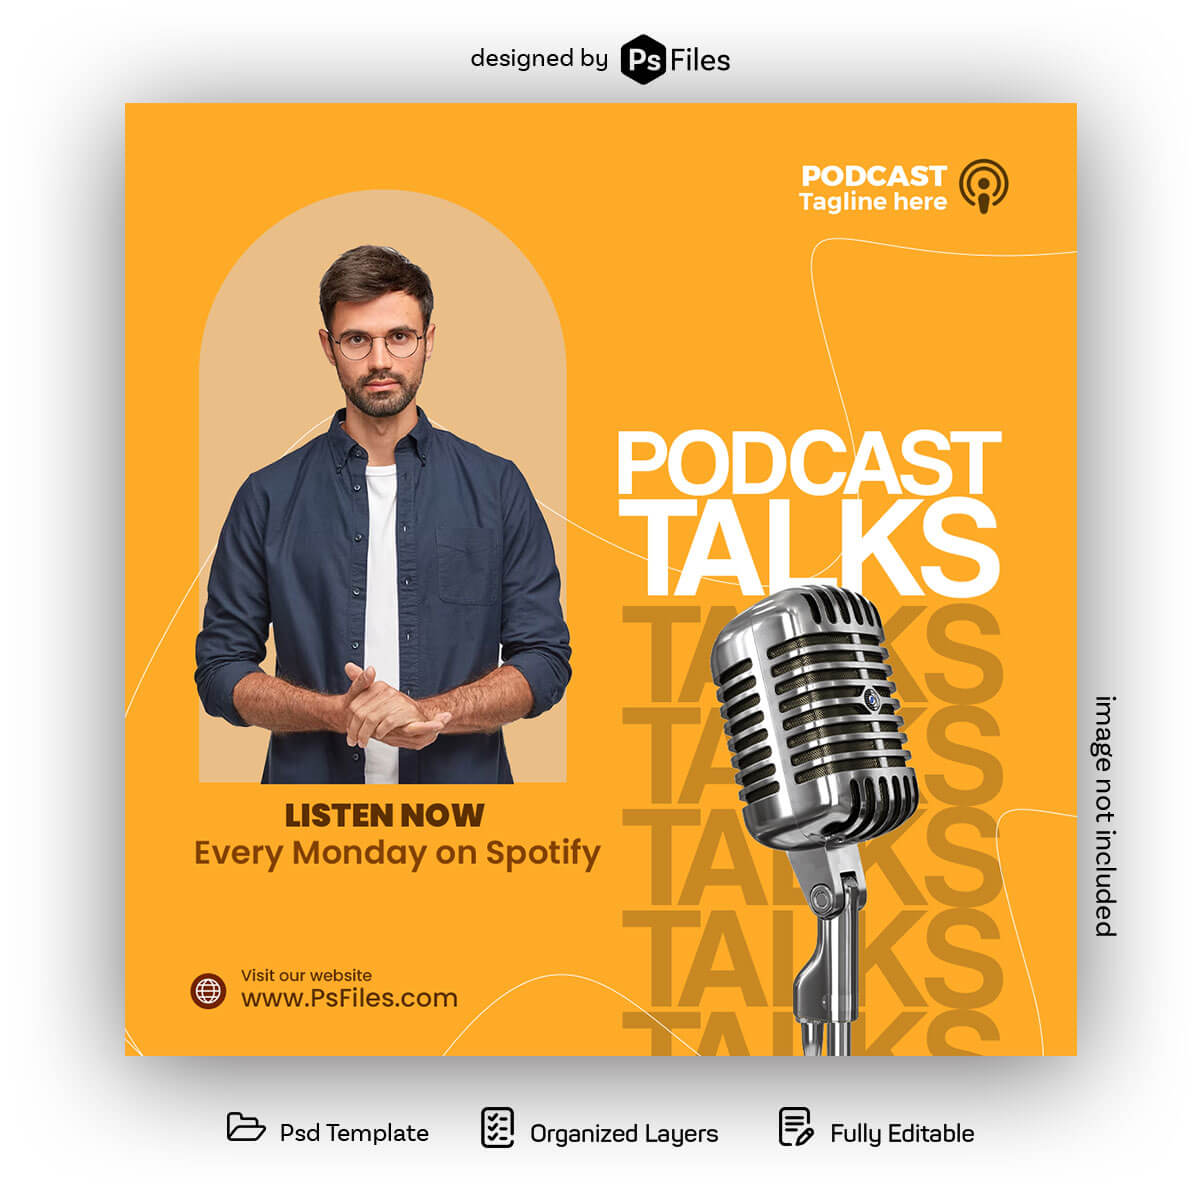 Podcast Cover Art Template Design PSD Free Download